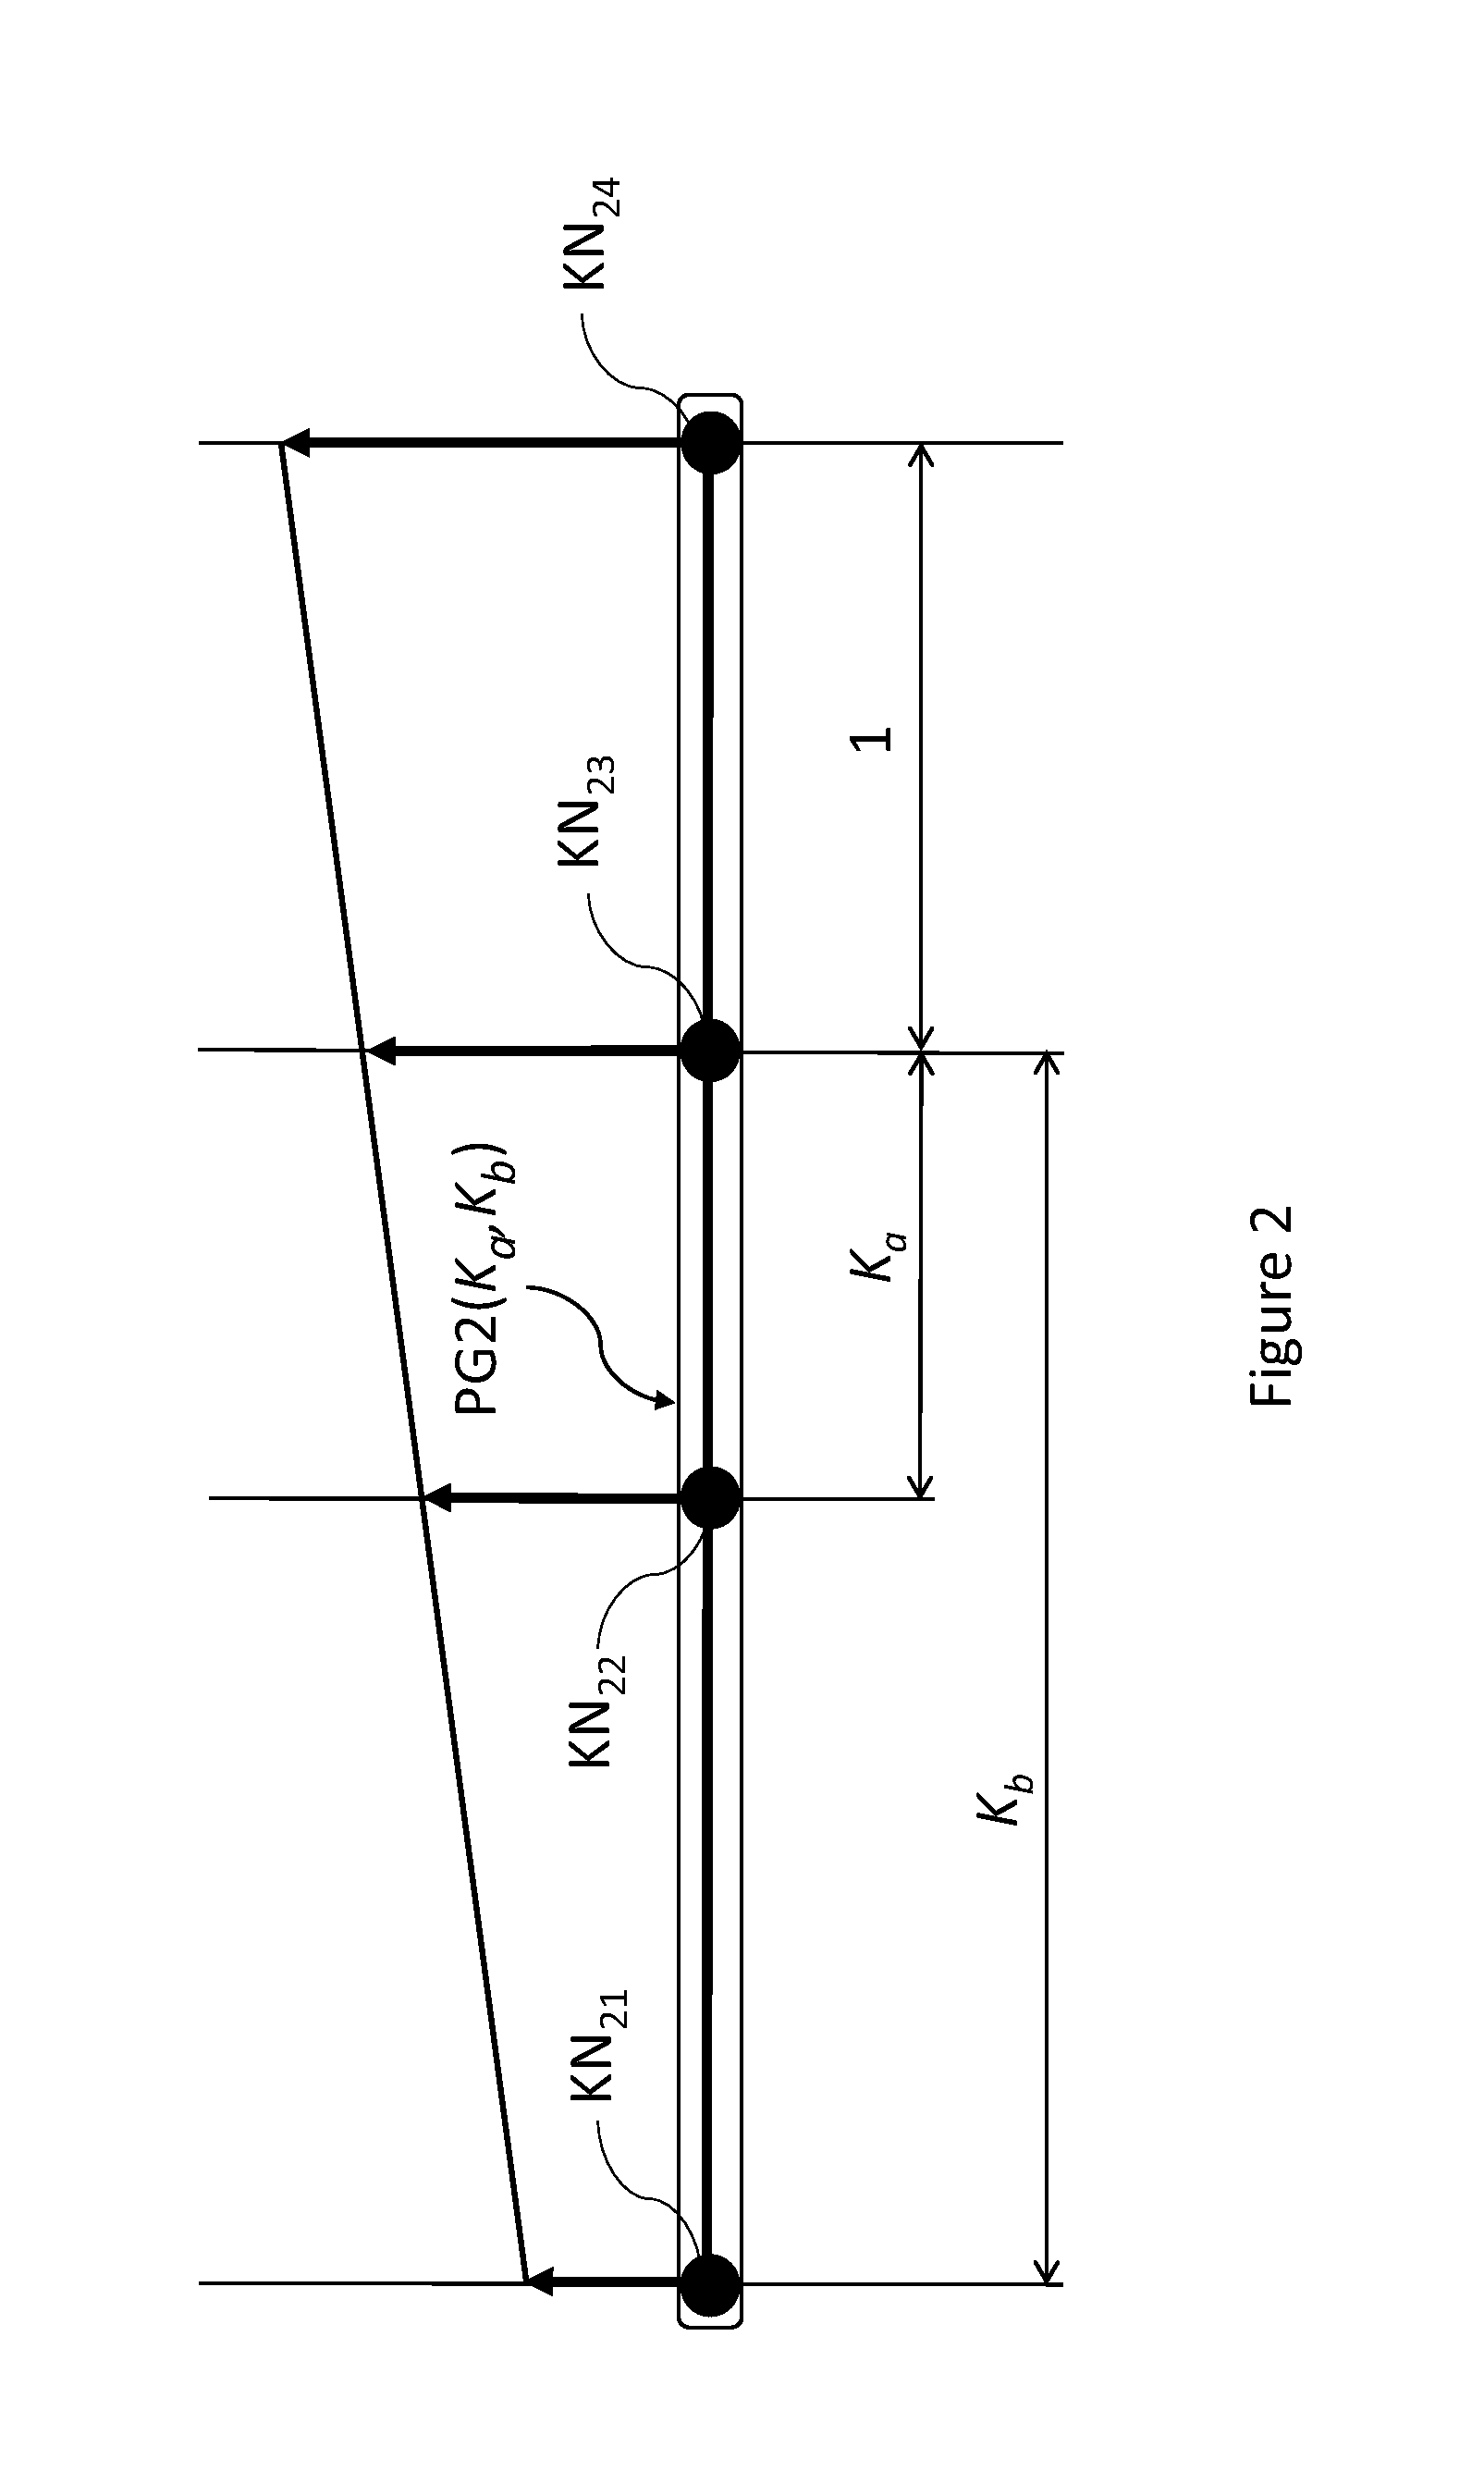 Multimode electromechanical variable speed transmission apparatus and method of control